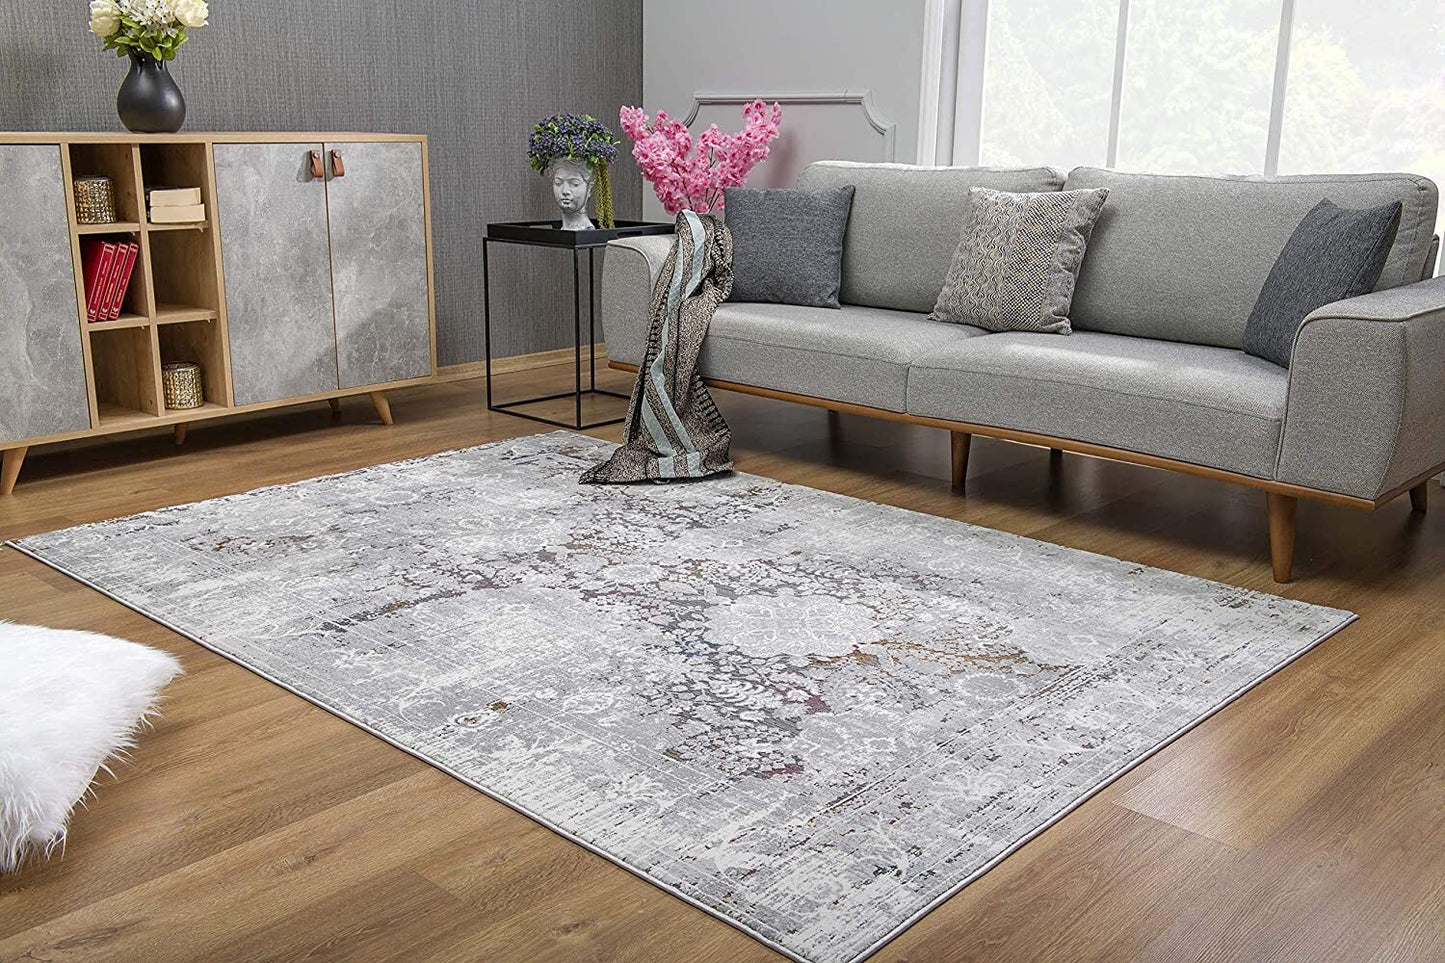 5" x 8" Gray Abstract Patterns Area Rug